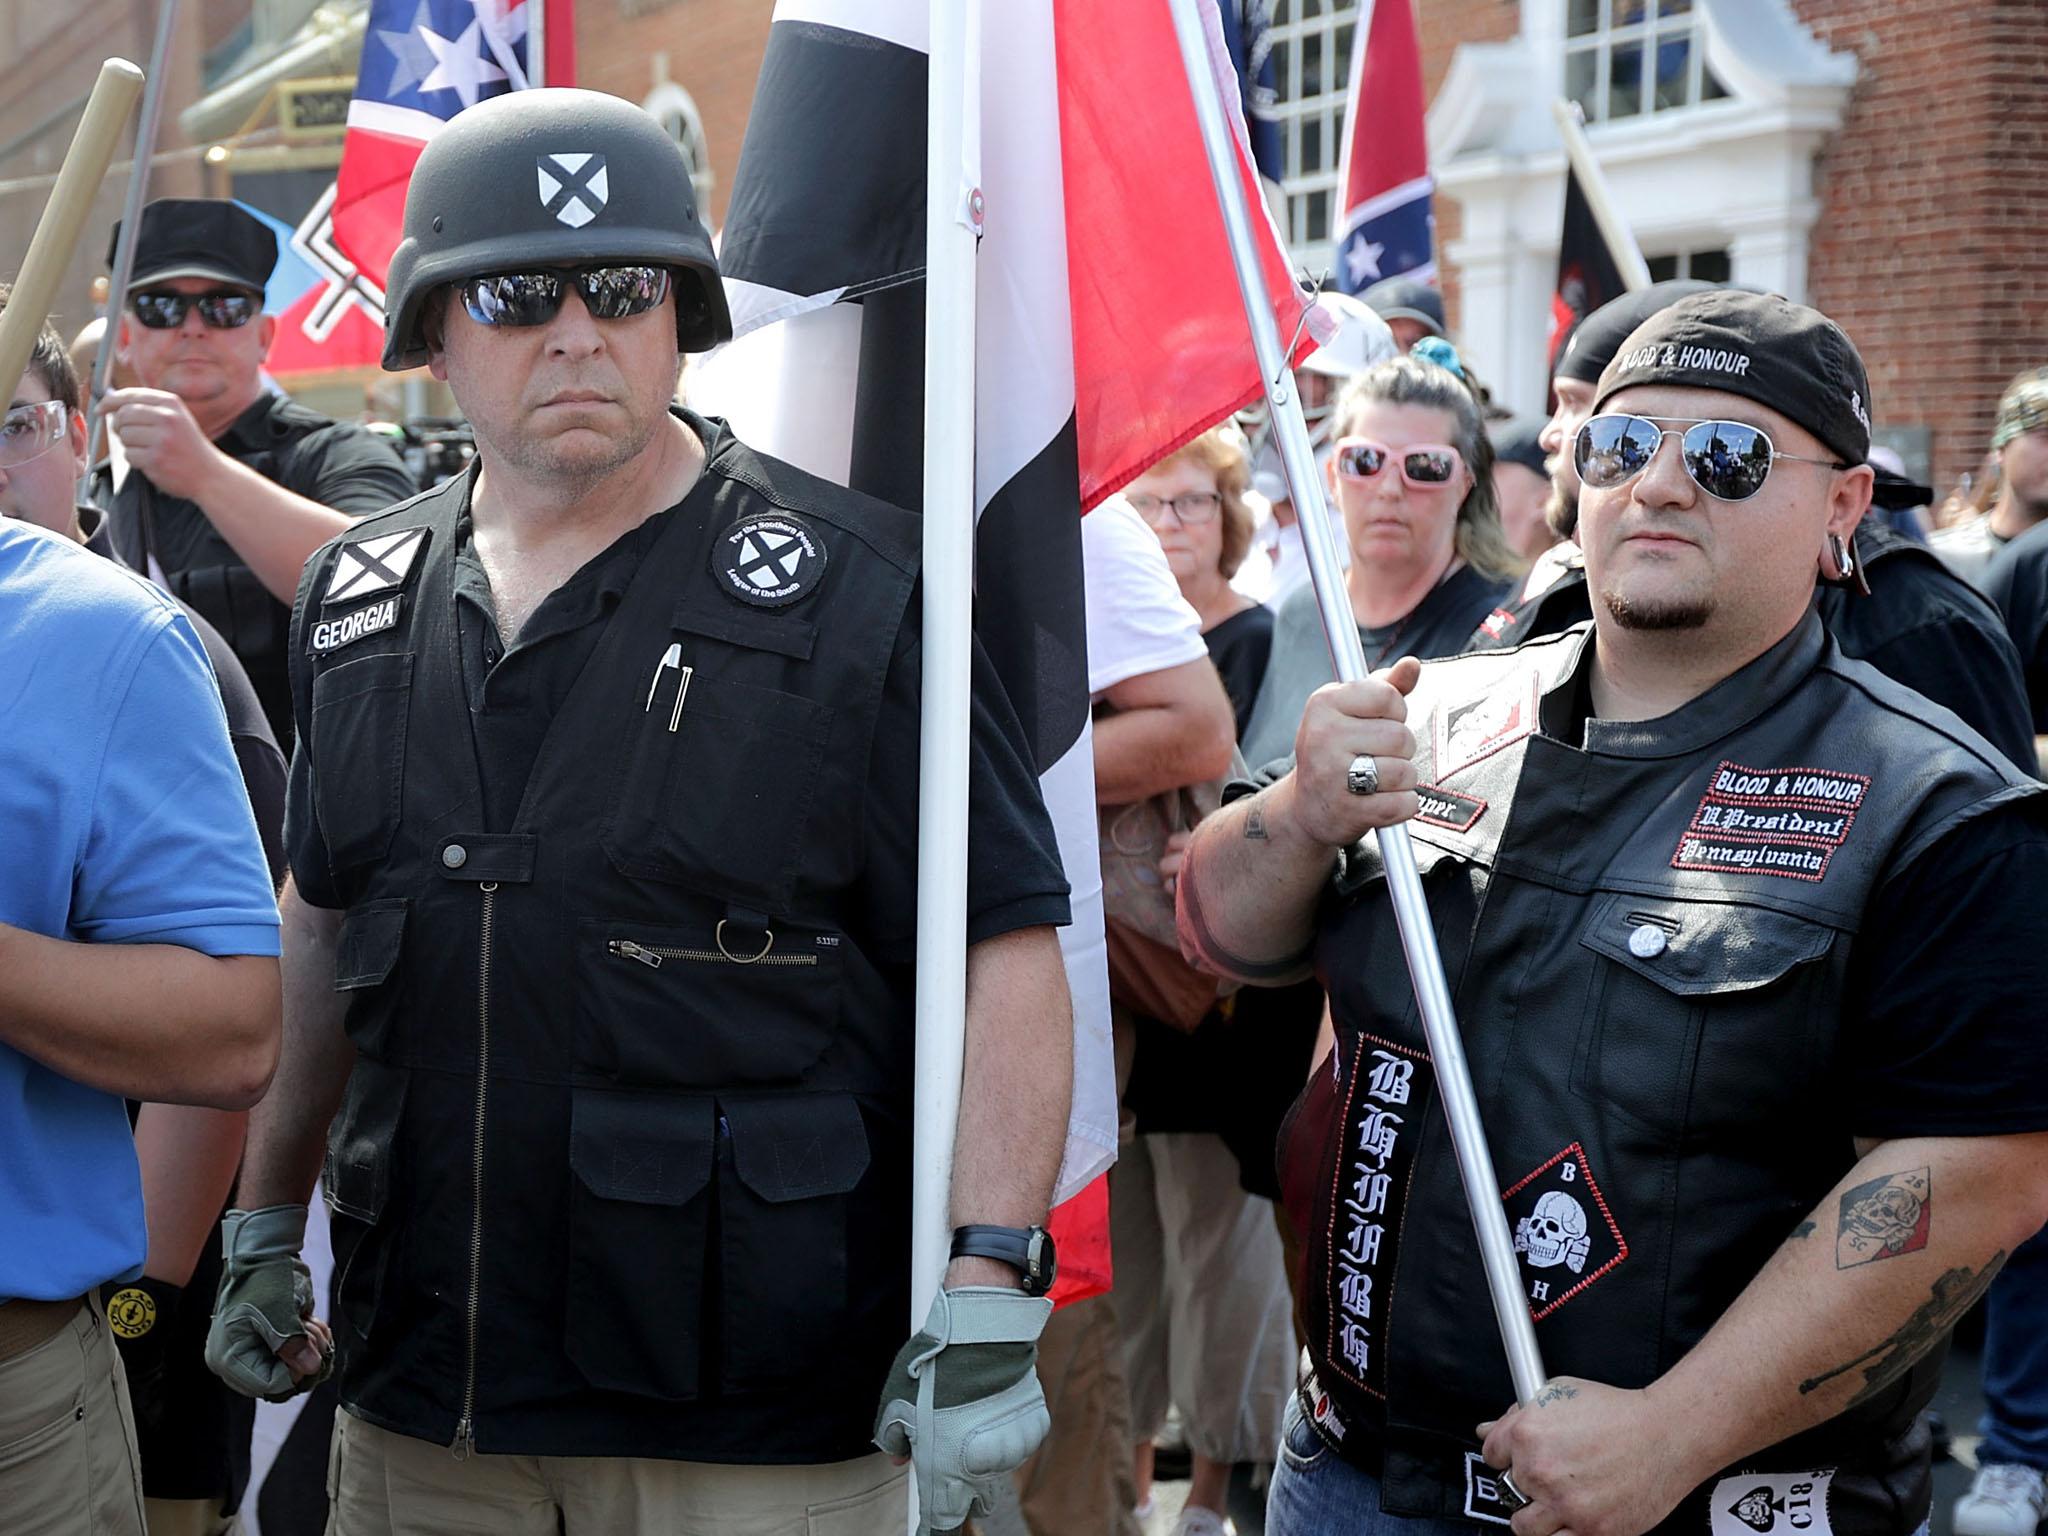 Hundreds of white nationalists, neo-Nazis and members of the alt-right marched during the "Unite the Right" rally in Charlottesville